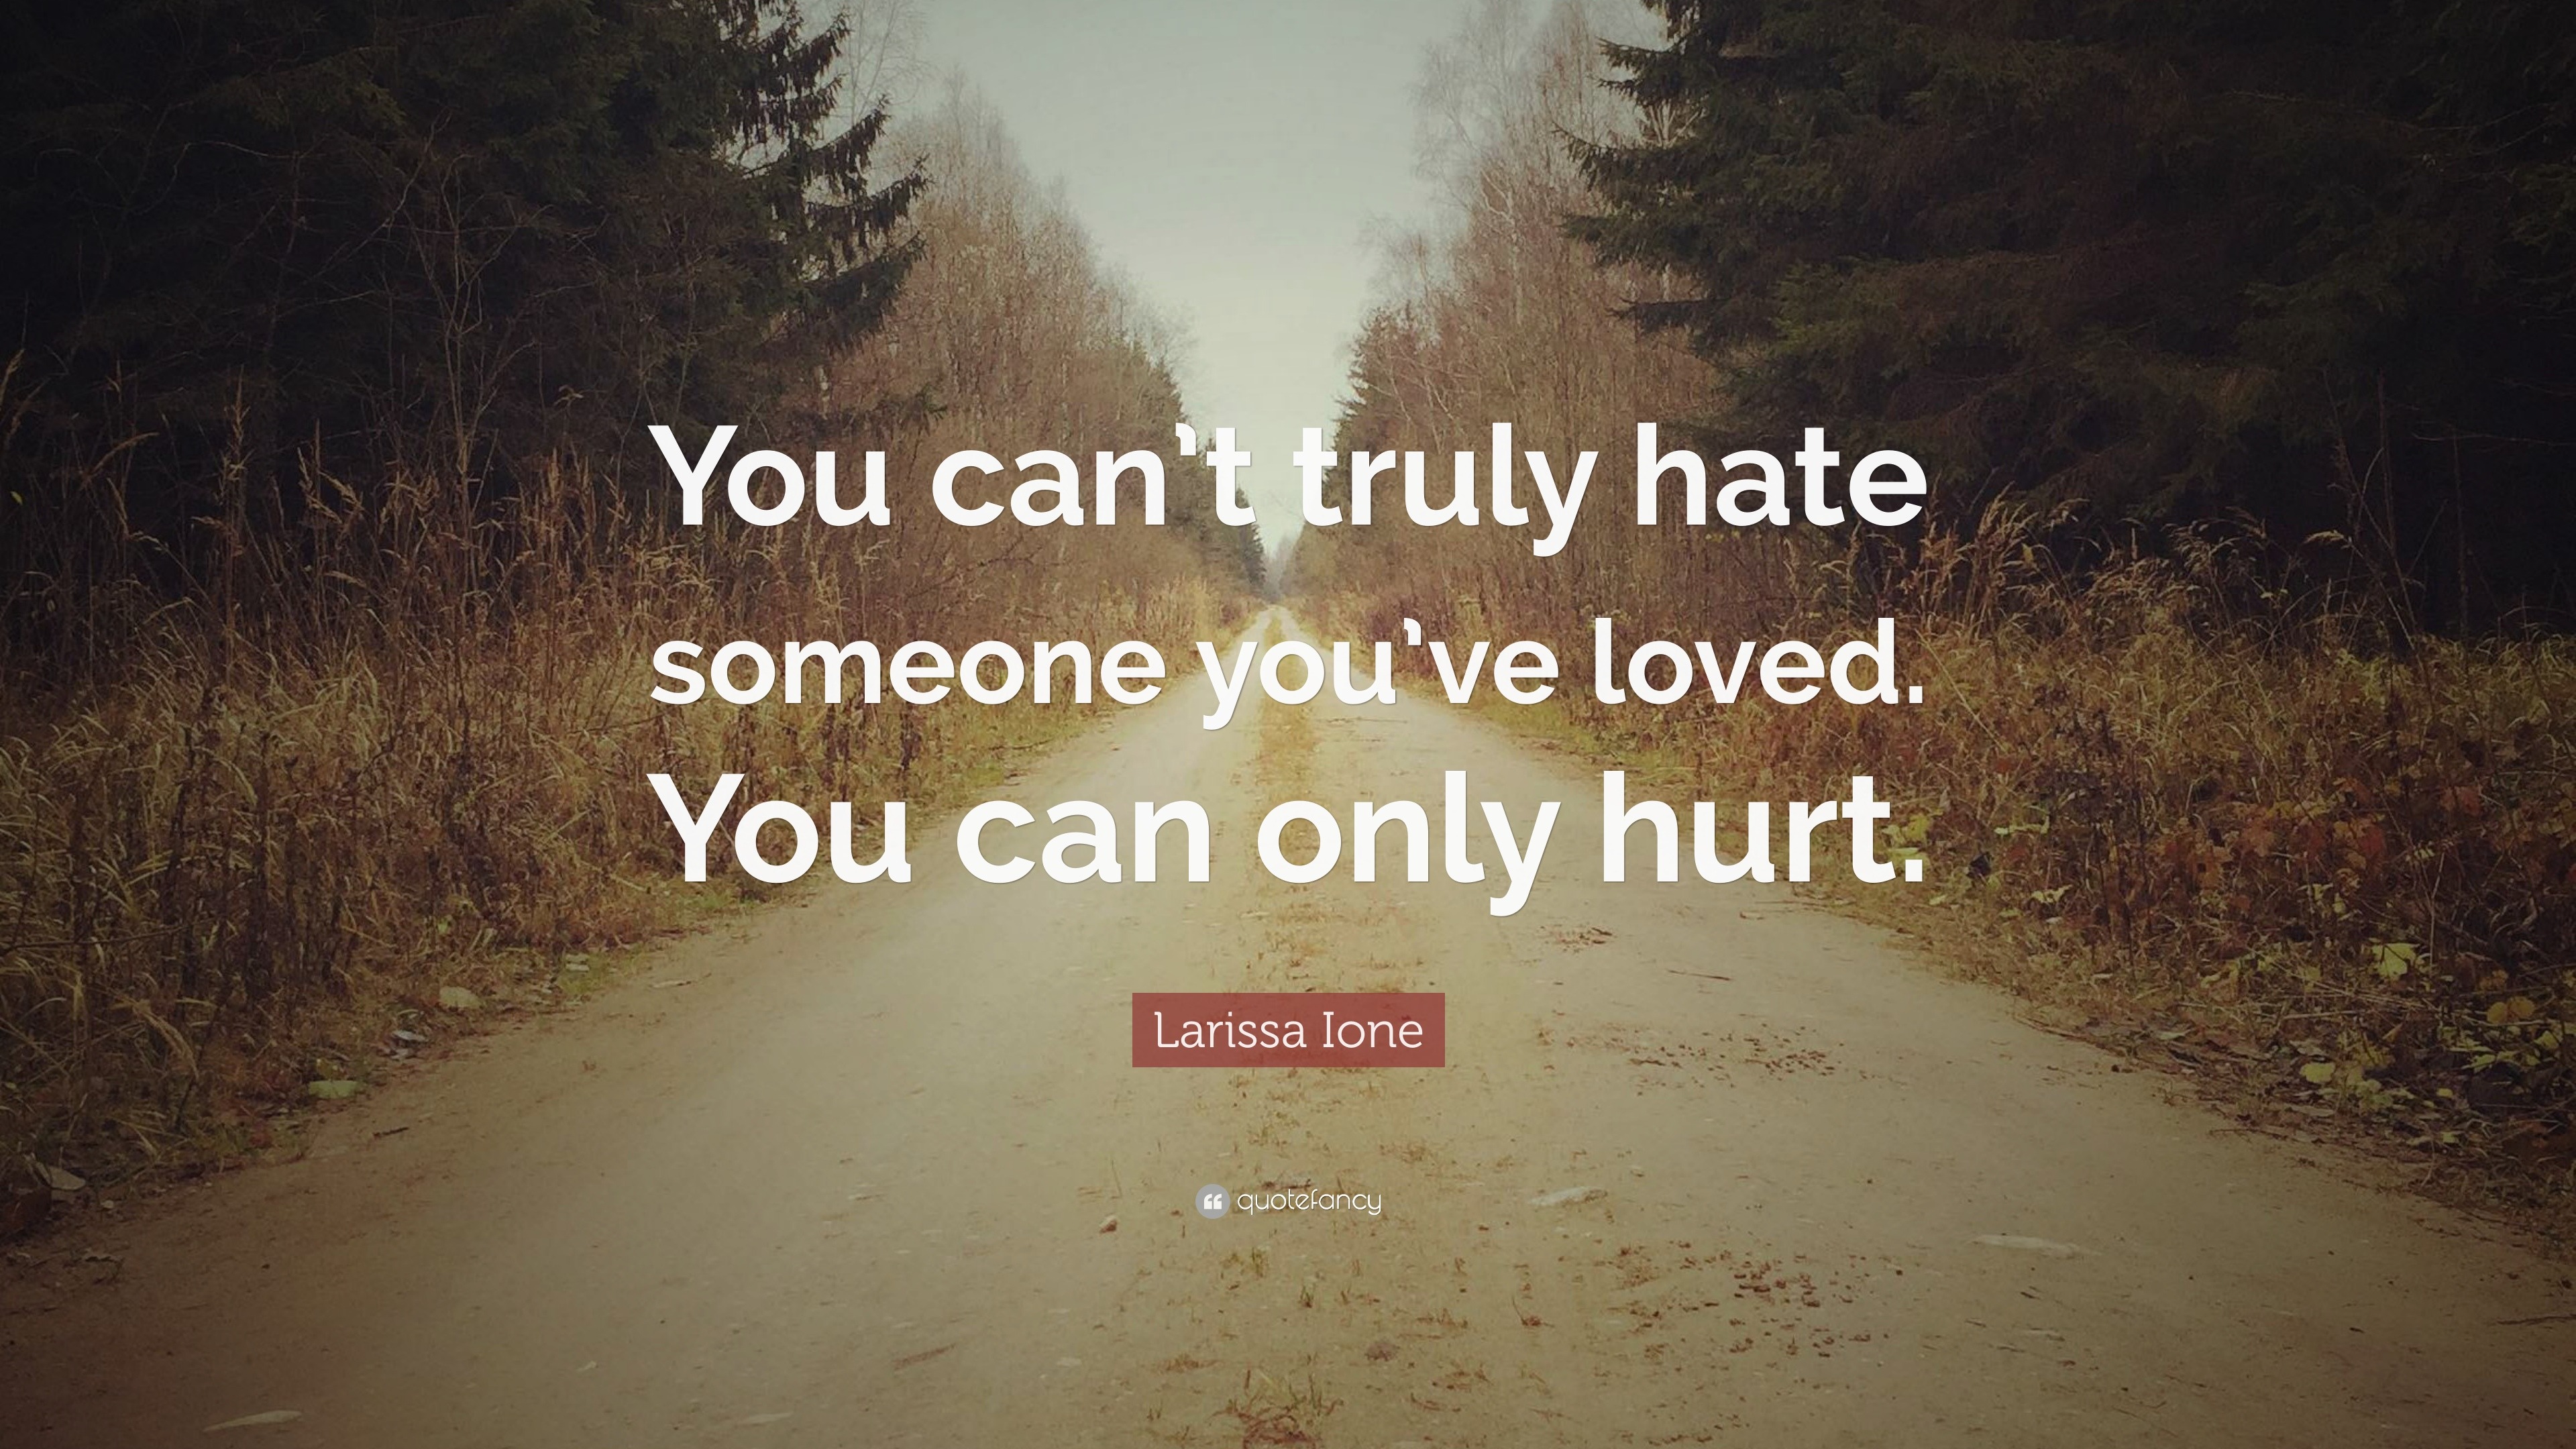 Larissa Ione Quote “You can t truly hate someone you ve loved